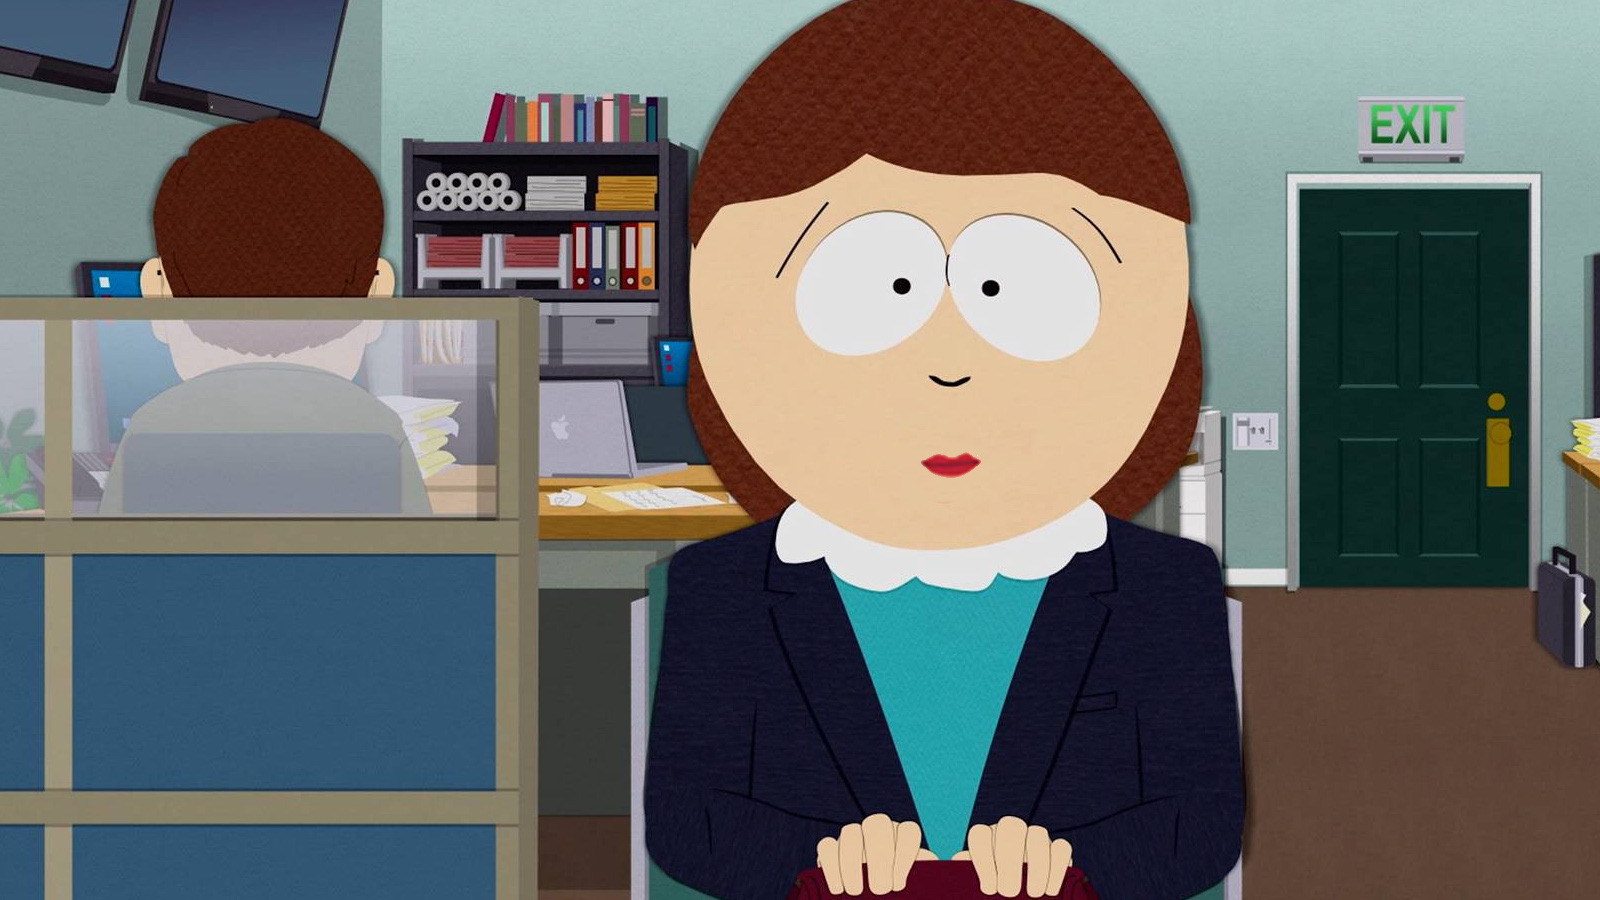 Watch the new trailer for 'South Park: The Streaming Wars